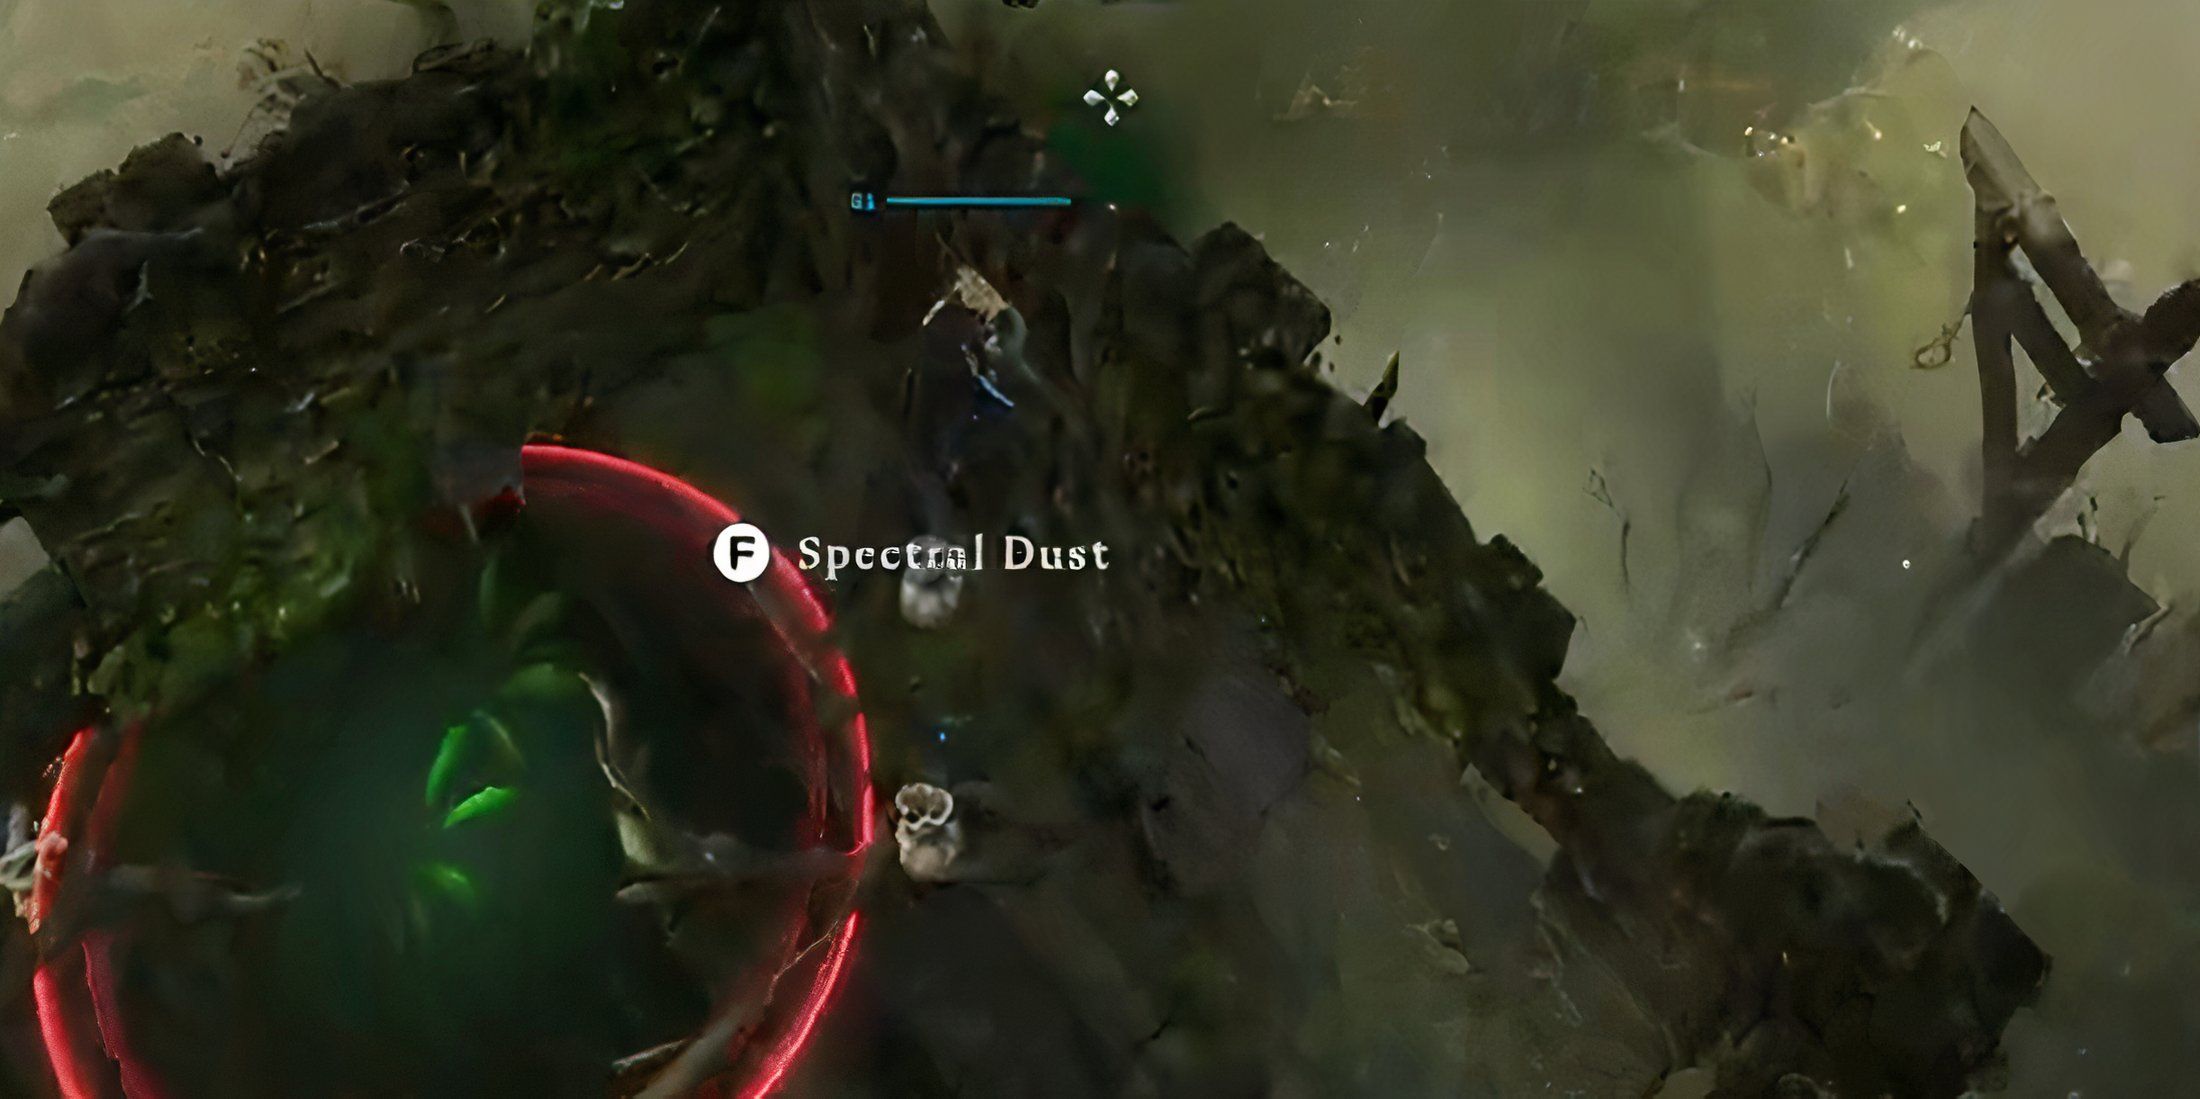 Looting Spectral Dust after Killing a Banshee in V Rising